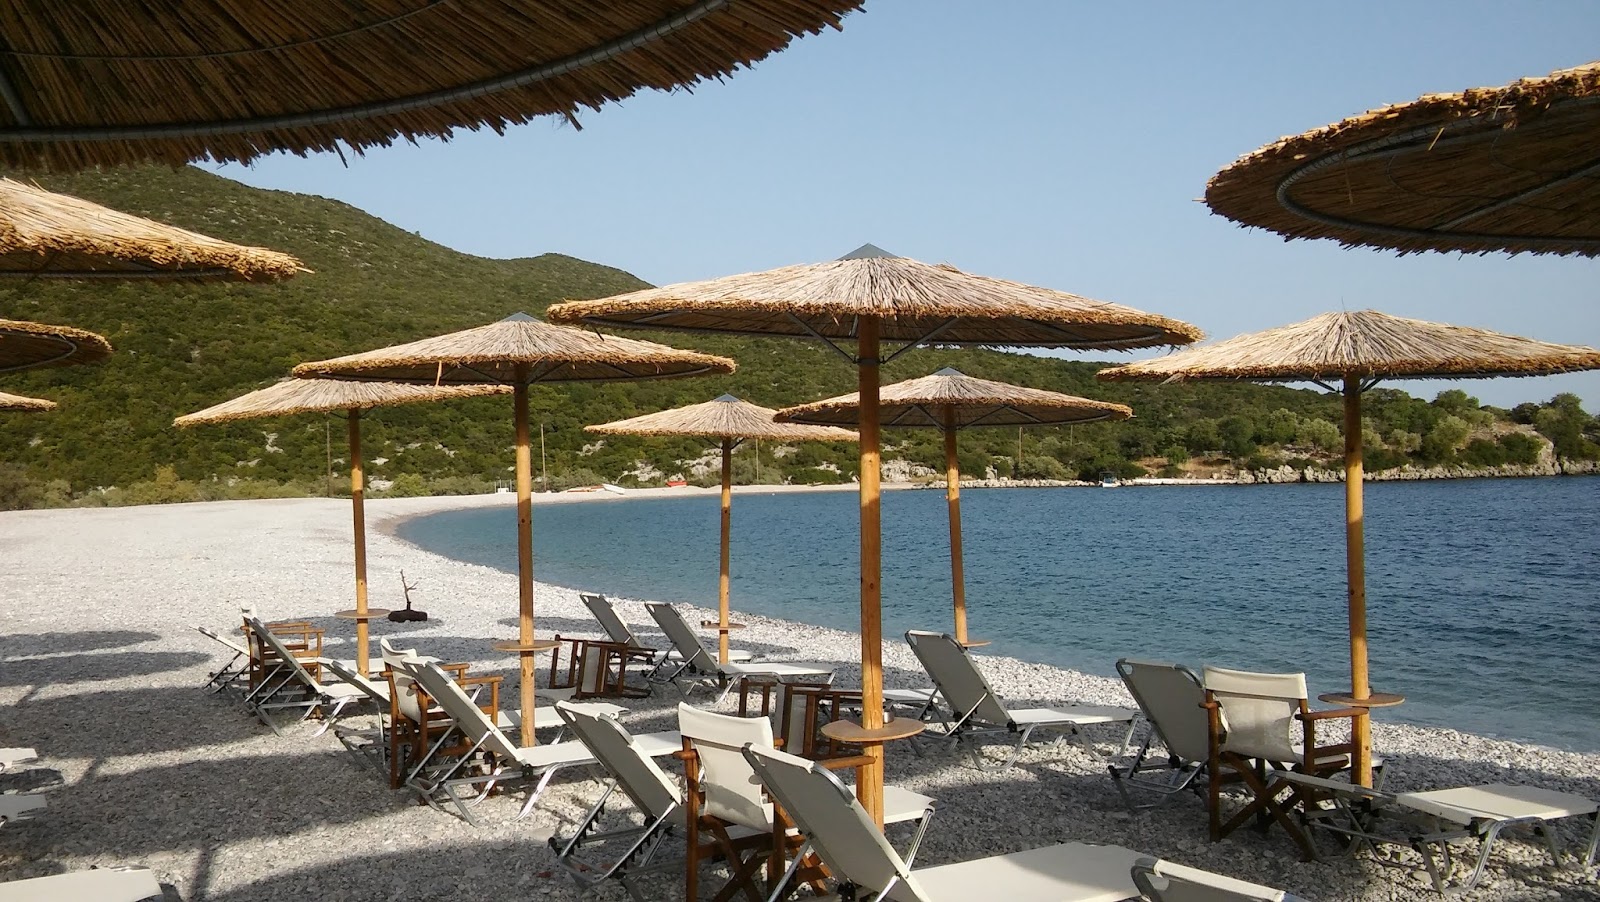 Photo of Fokiano beach - popular place among relax connoisseurs